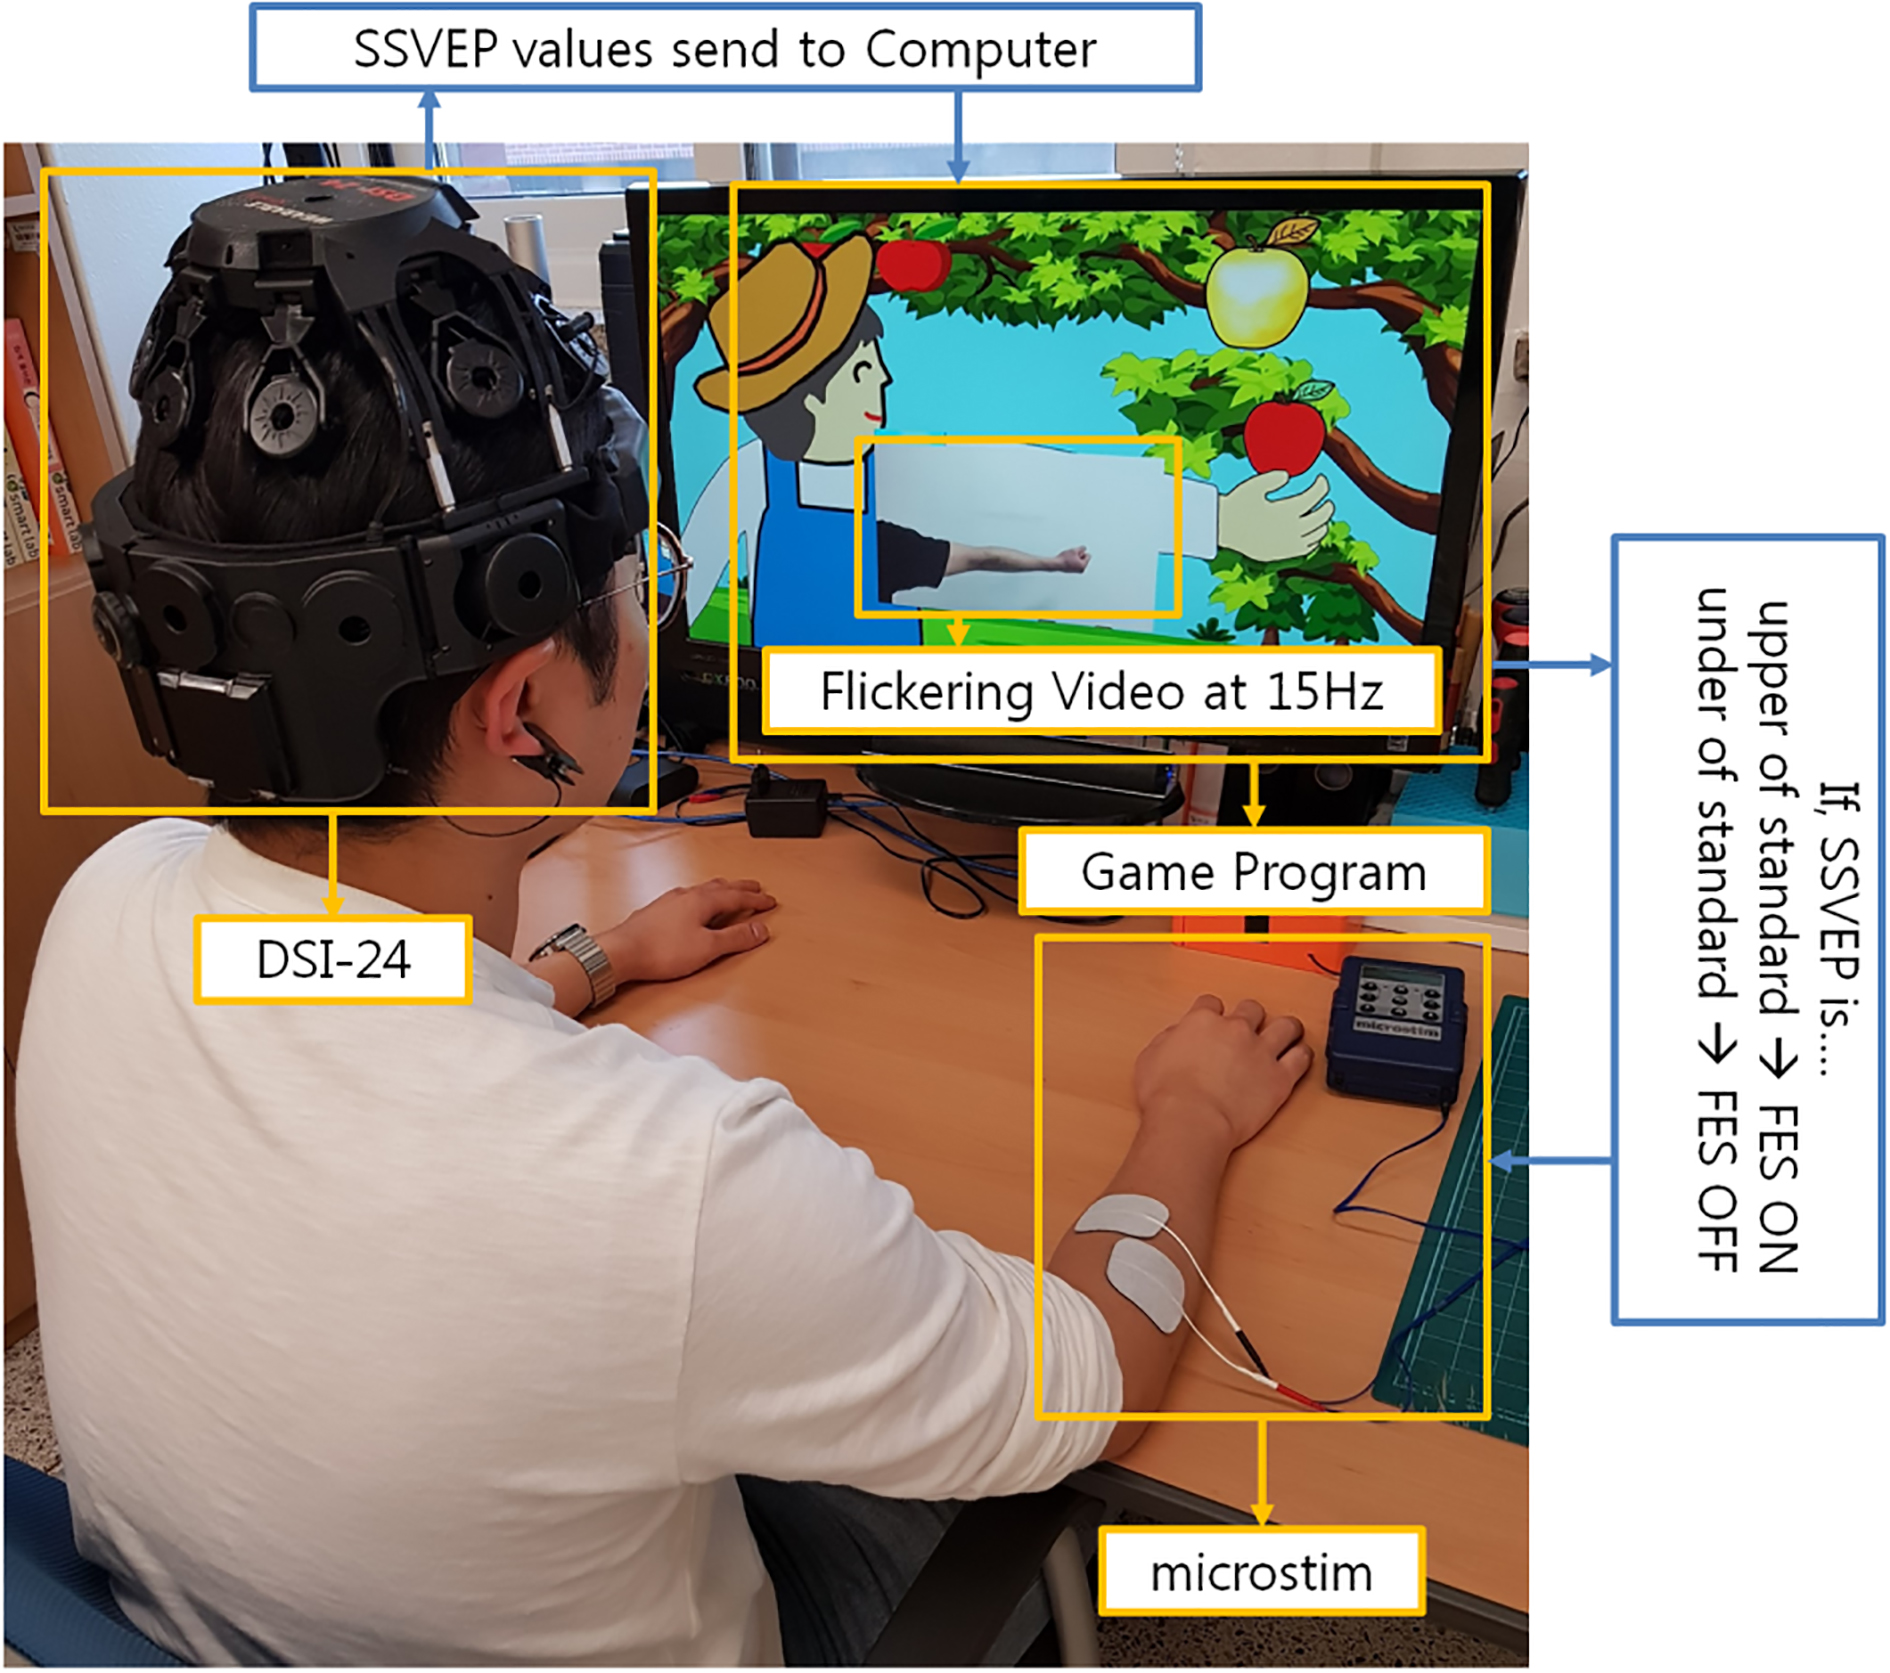 The experiment utilized an EEG acquisition device (DSI-24) and a functional electrical stimulation (FES; Microstim) device. The game program indicated a flickering action video at 15 Hz. The DSI-24 received steady state visual evoked potential (SSVEP) values which were transferred to the computer. If SSVEP was greater than the standard, the FES turned on and transmitted electrical stimulation to the electrodes; else, the FES turned off and did not trasmit electrical stimulation to the electrodes.